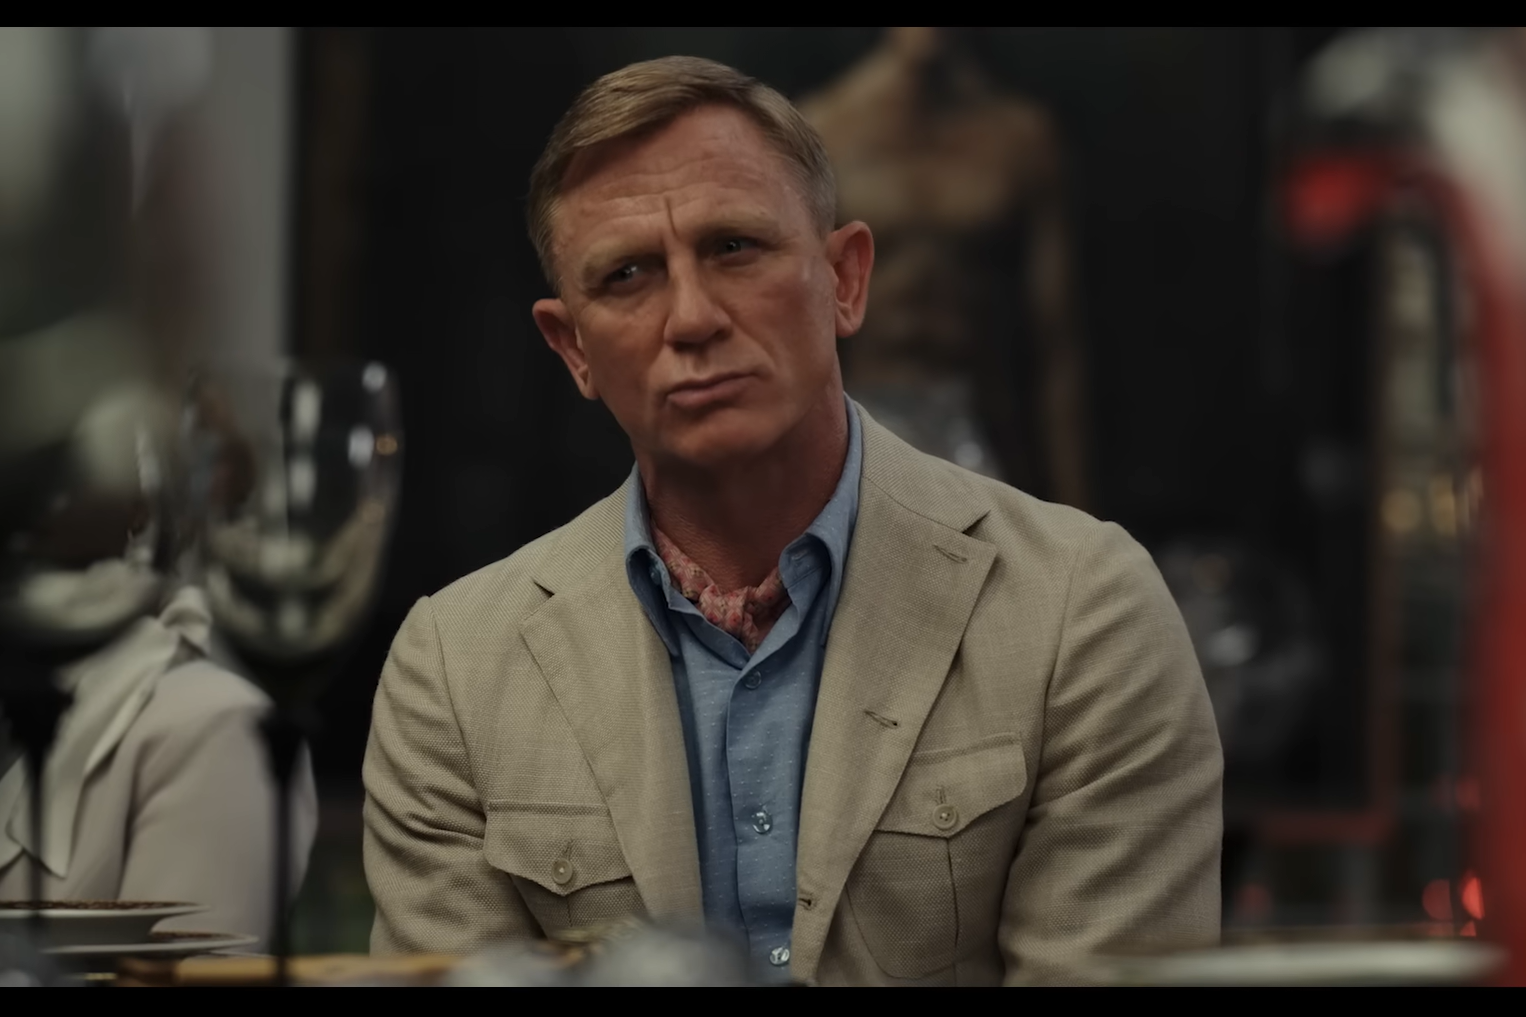 “Knives Out 2” worth $400 million and Daniel Craig earned a better “glass onion” box office ahead of Netflix

+2023